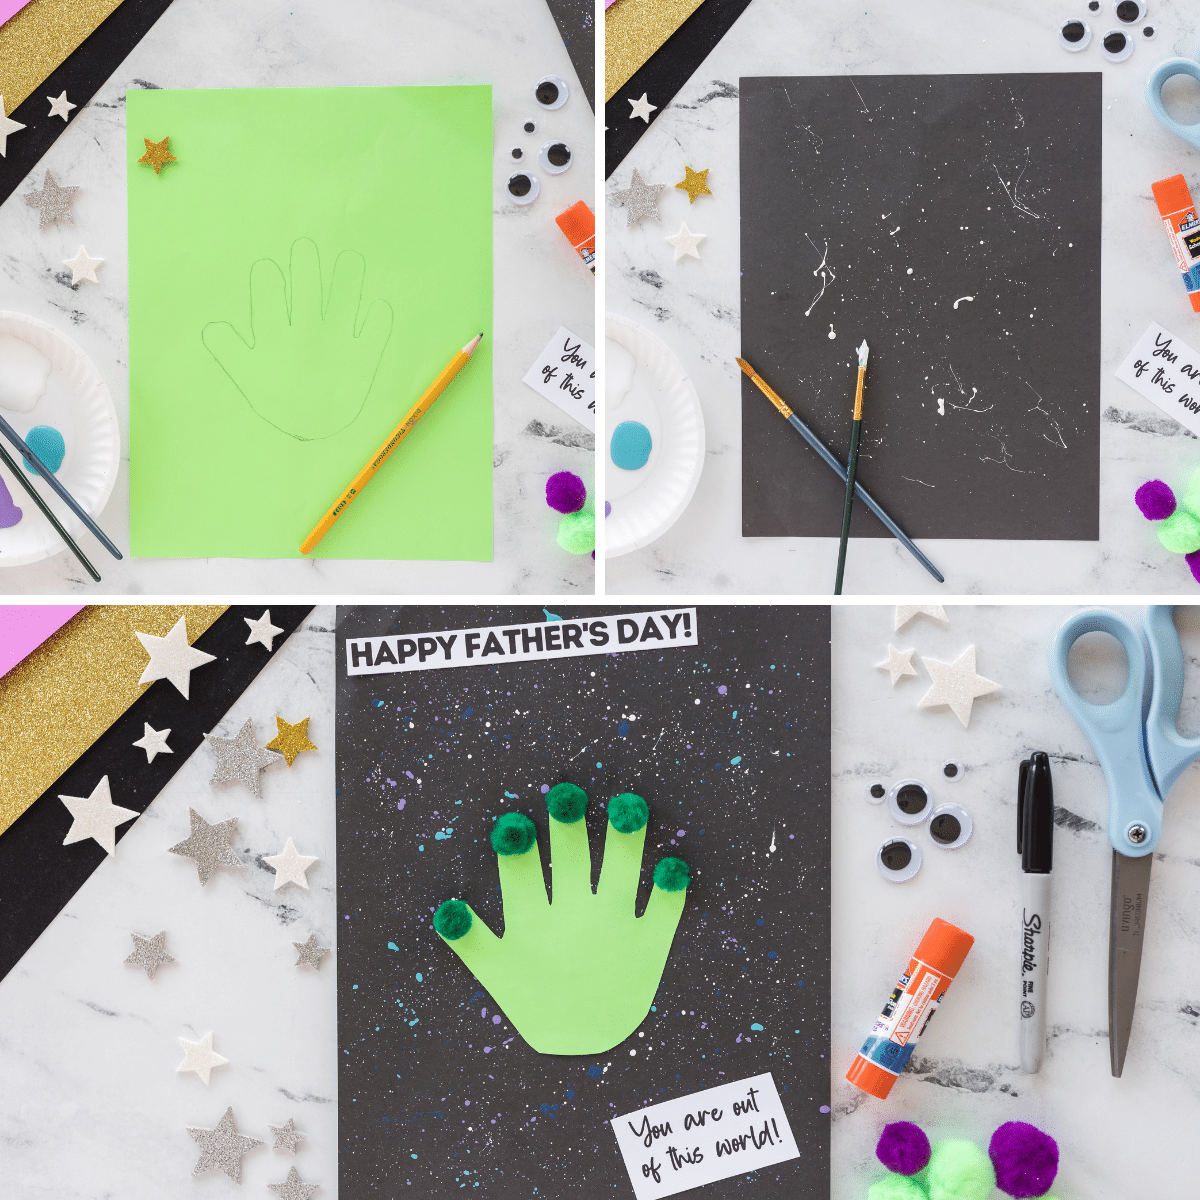 process shots to make galaxy paper and father's day craft